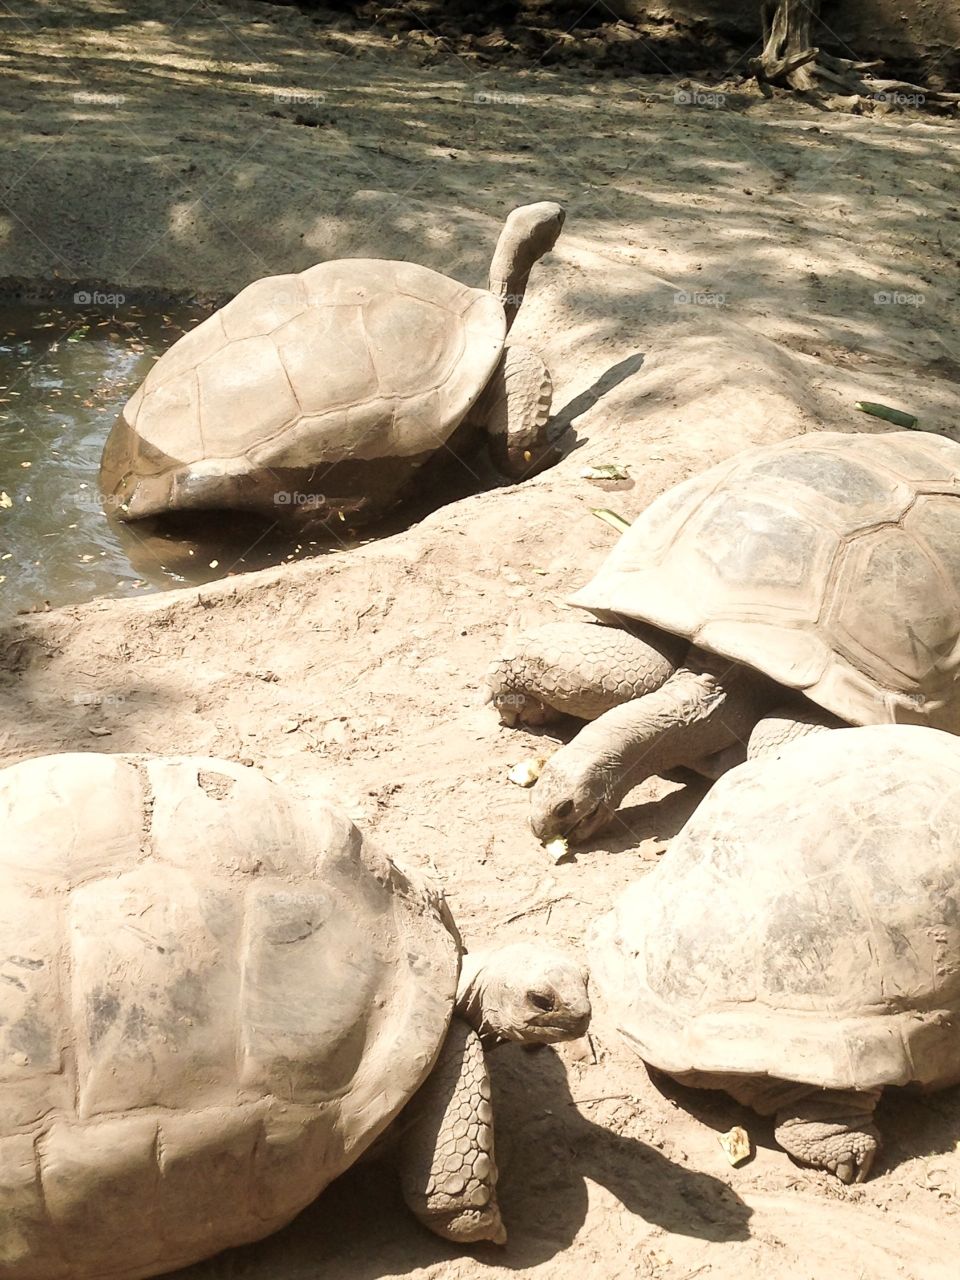 Tortoises basking in the sun. A rather monochromatic picture as everything around is a sort of beige